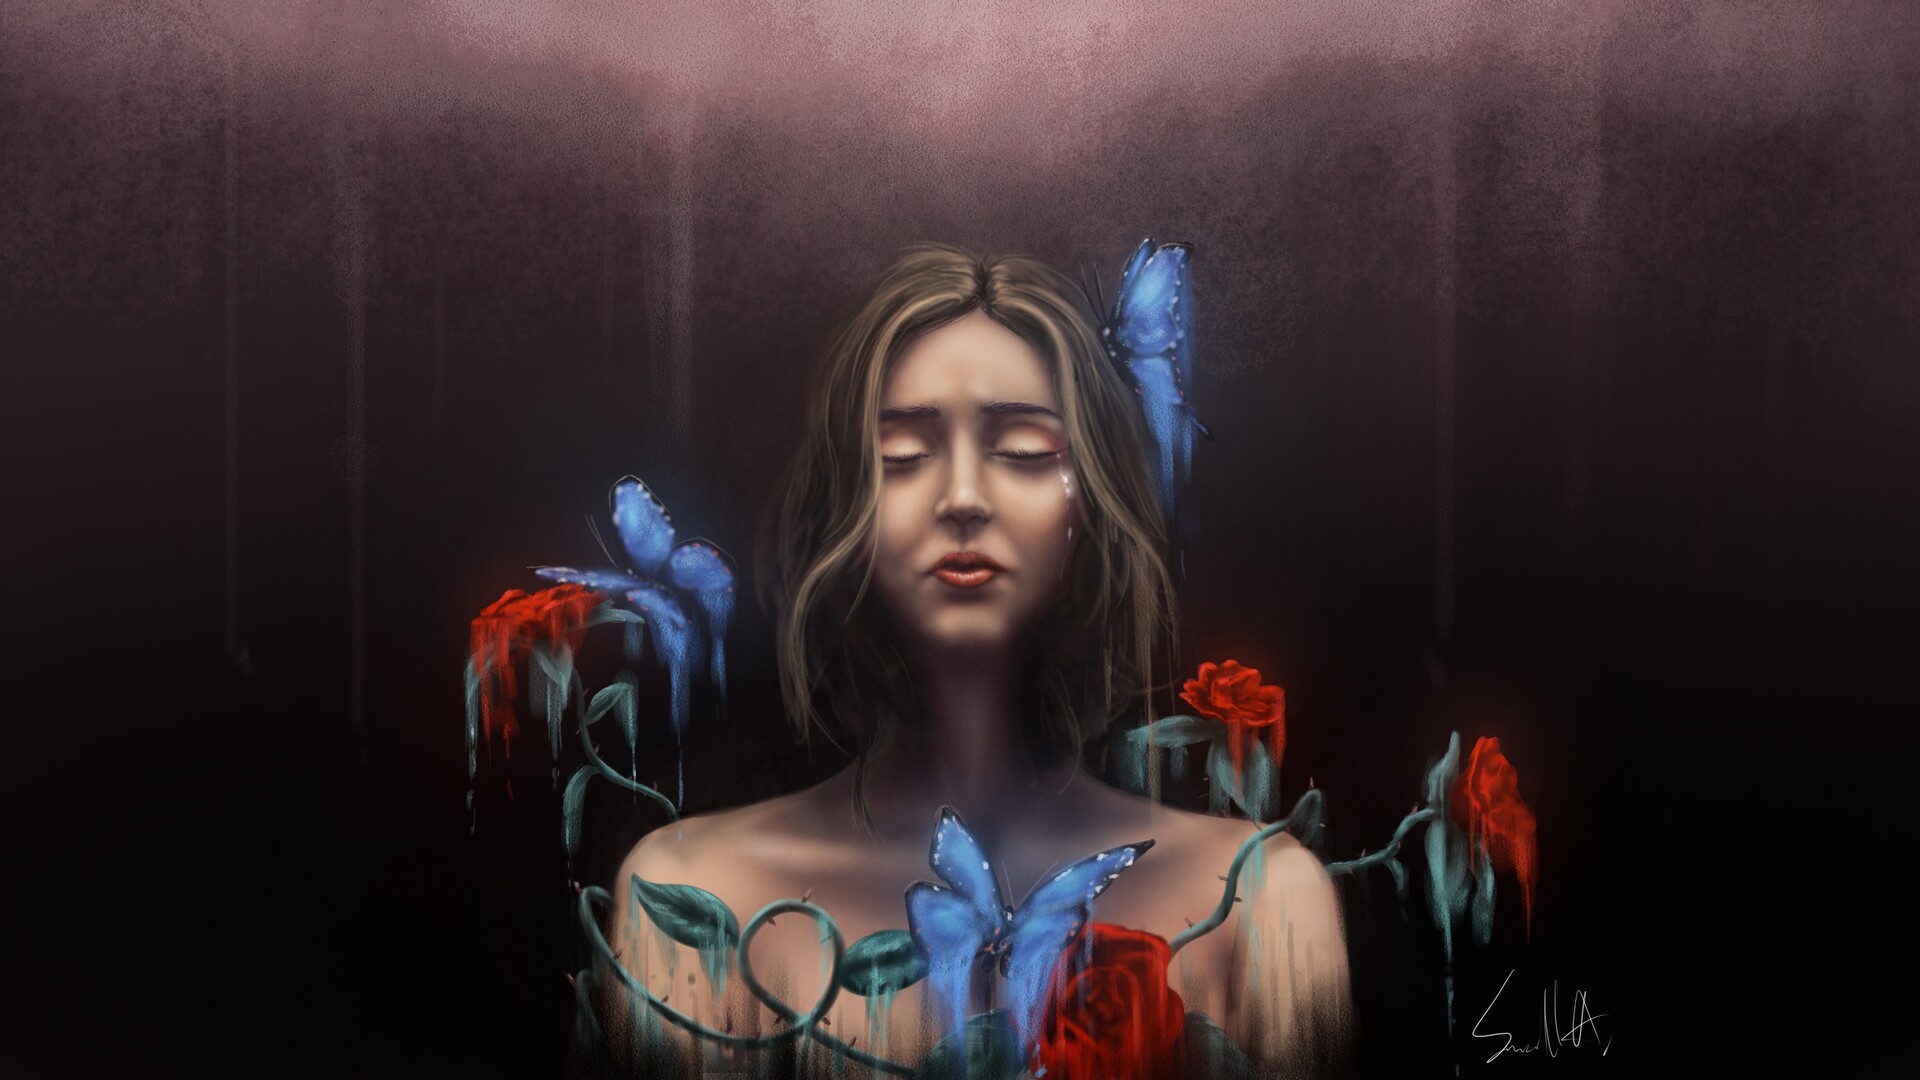 Small Alley Butterflies Butterfly Closed Eyes Closed Mouth Crying Woman Crying Roses Rose Leaves Hai 1920x1080